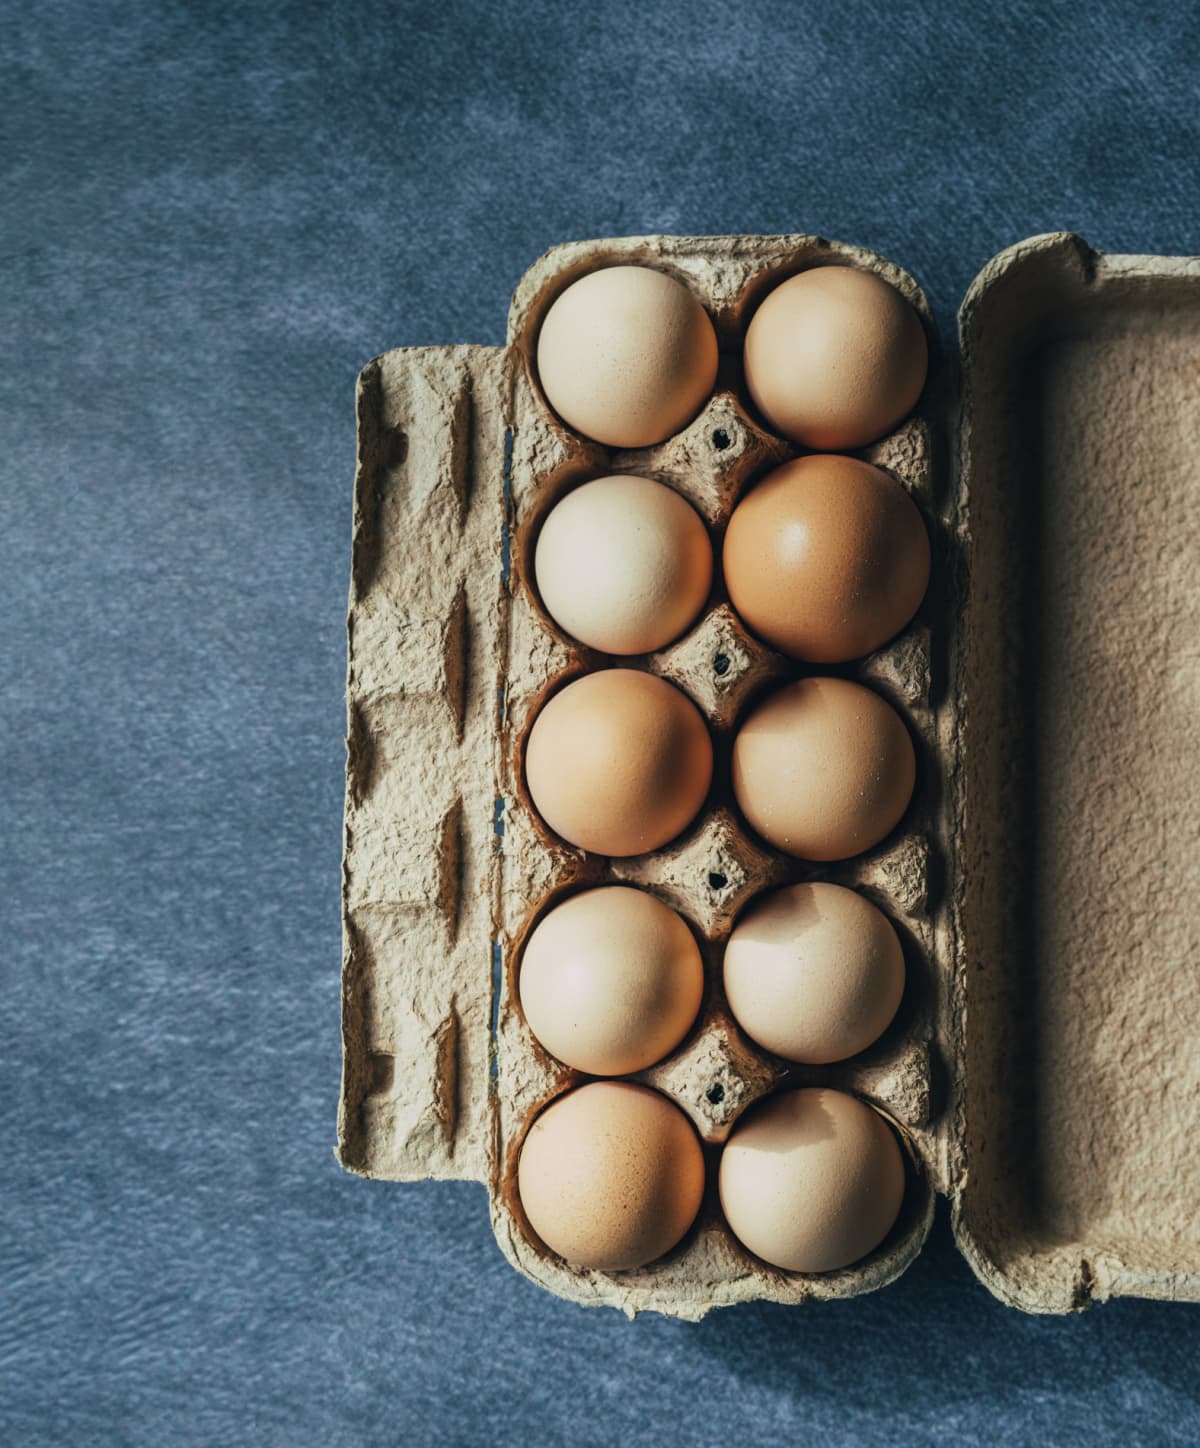 Directly above photo of dozen eggs on a blue table